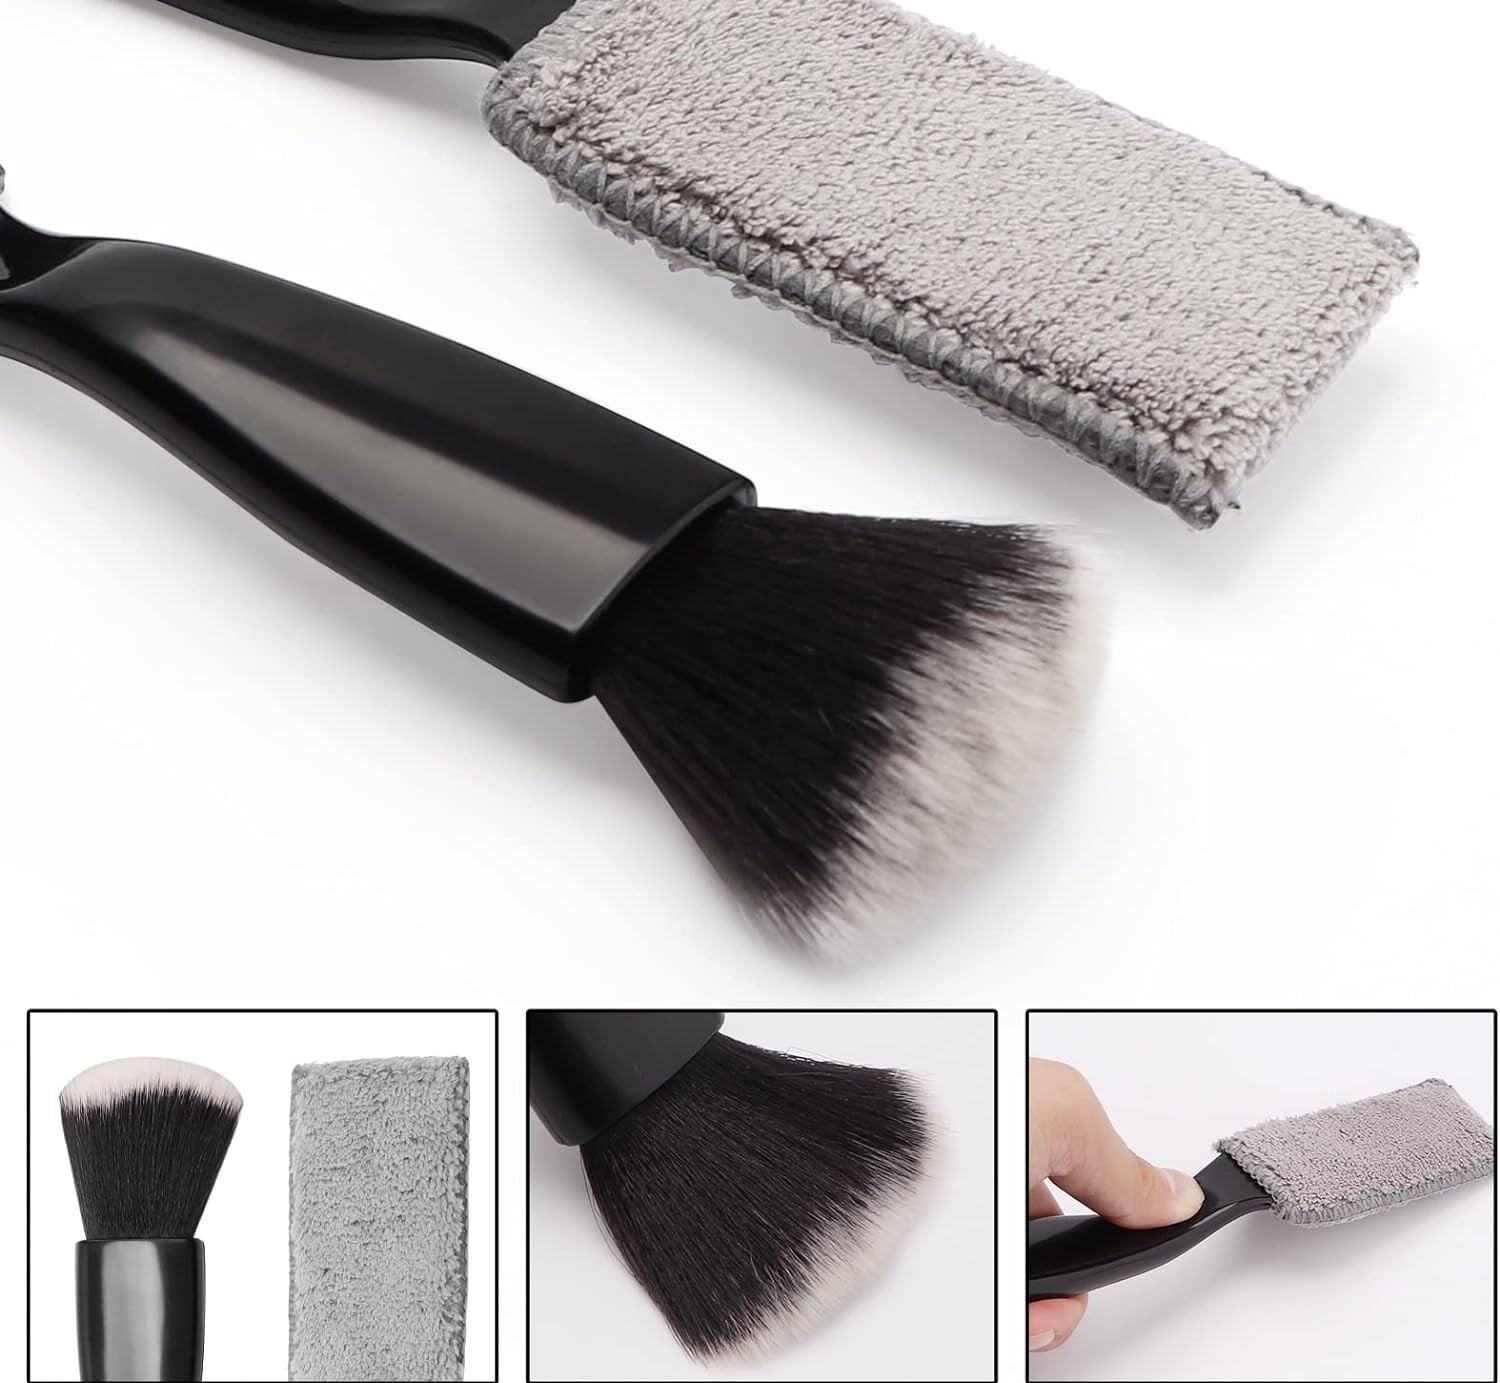 Double Head Brush for Car Cleaning,2 in 1 Portable Car Interior Dust Brush,Soft